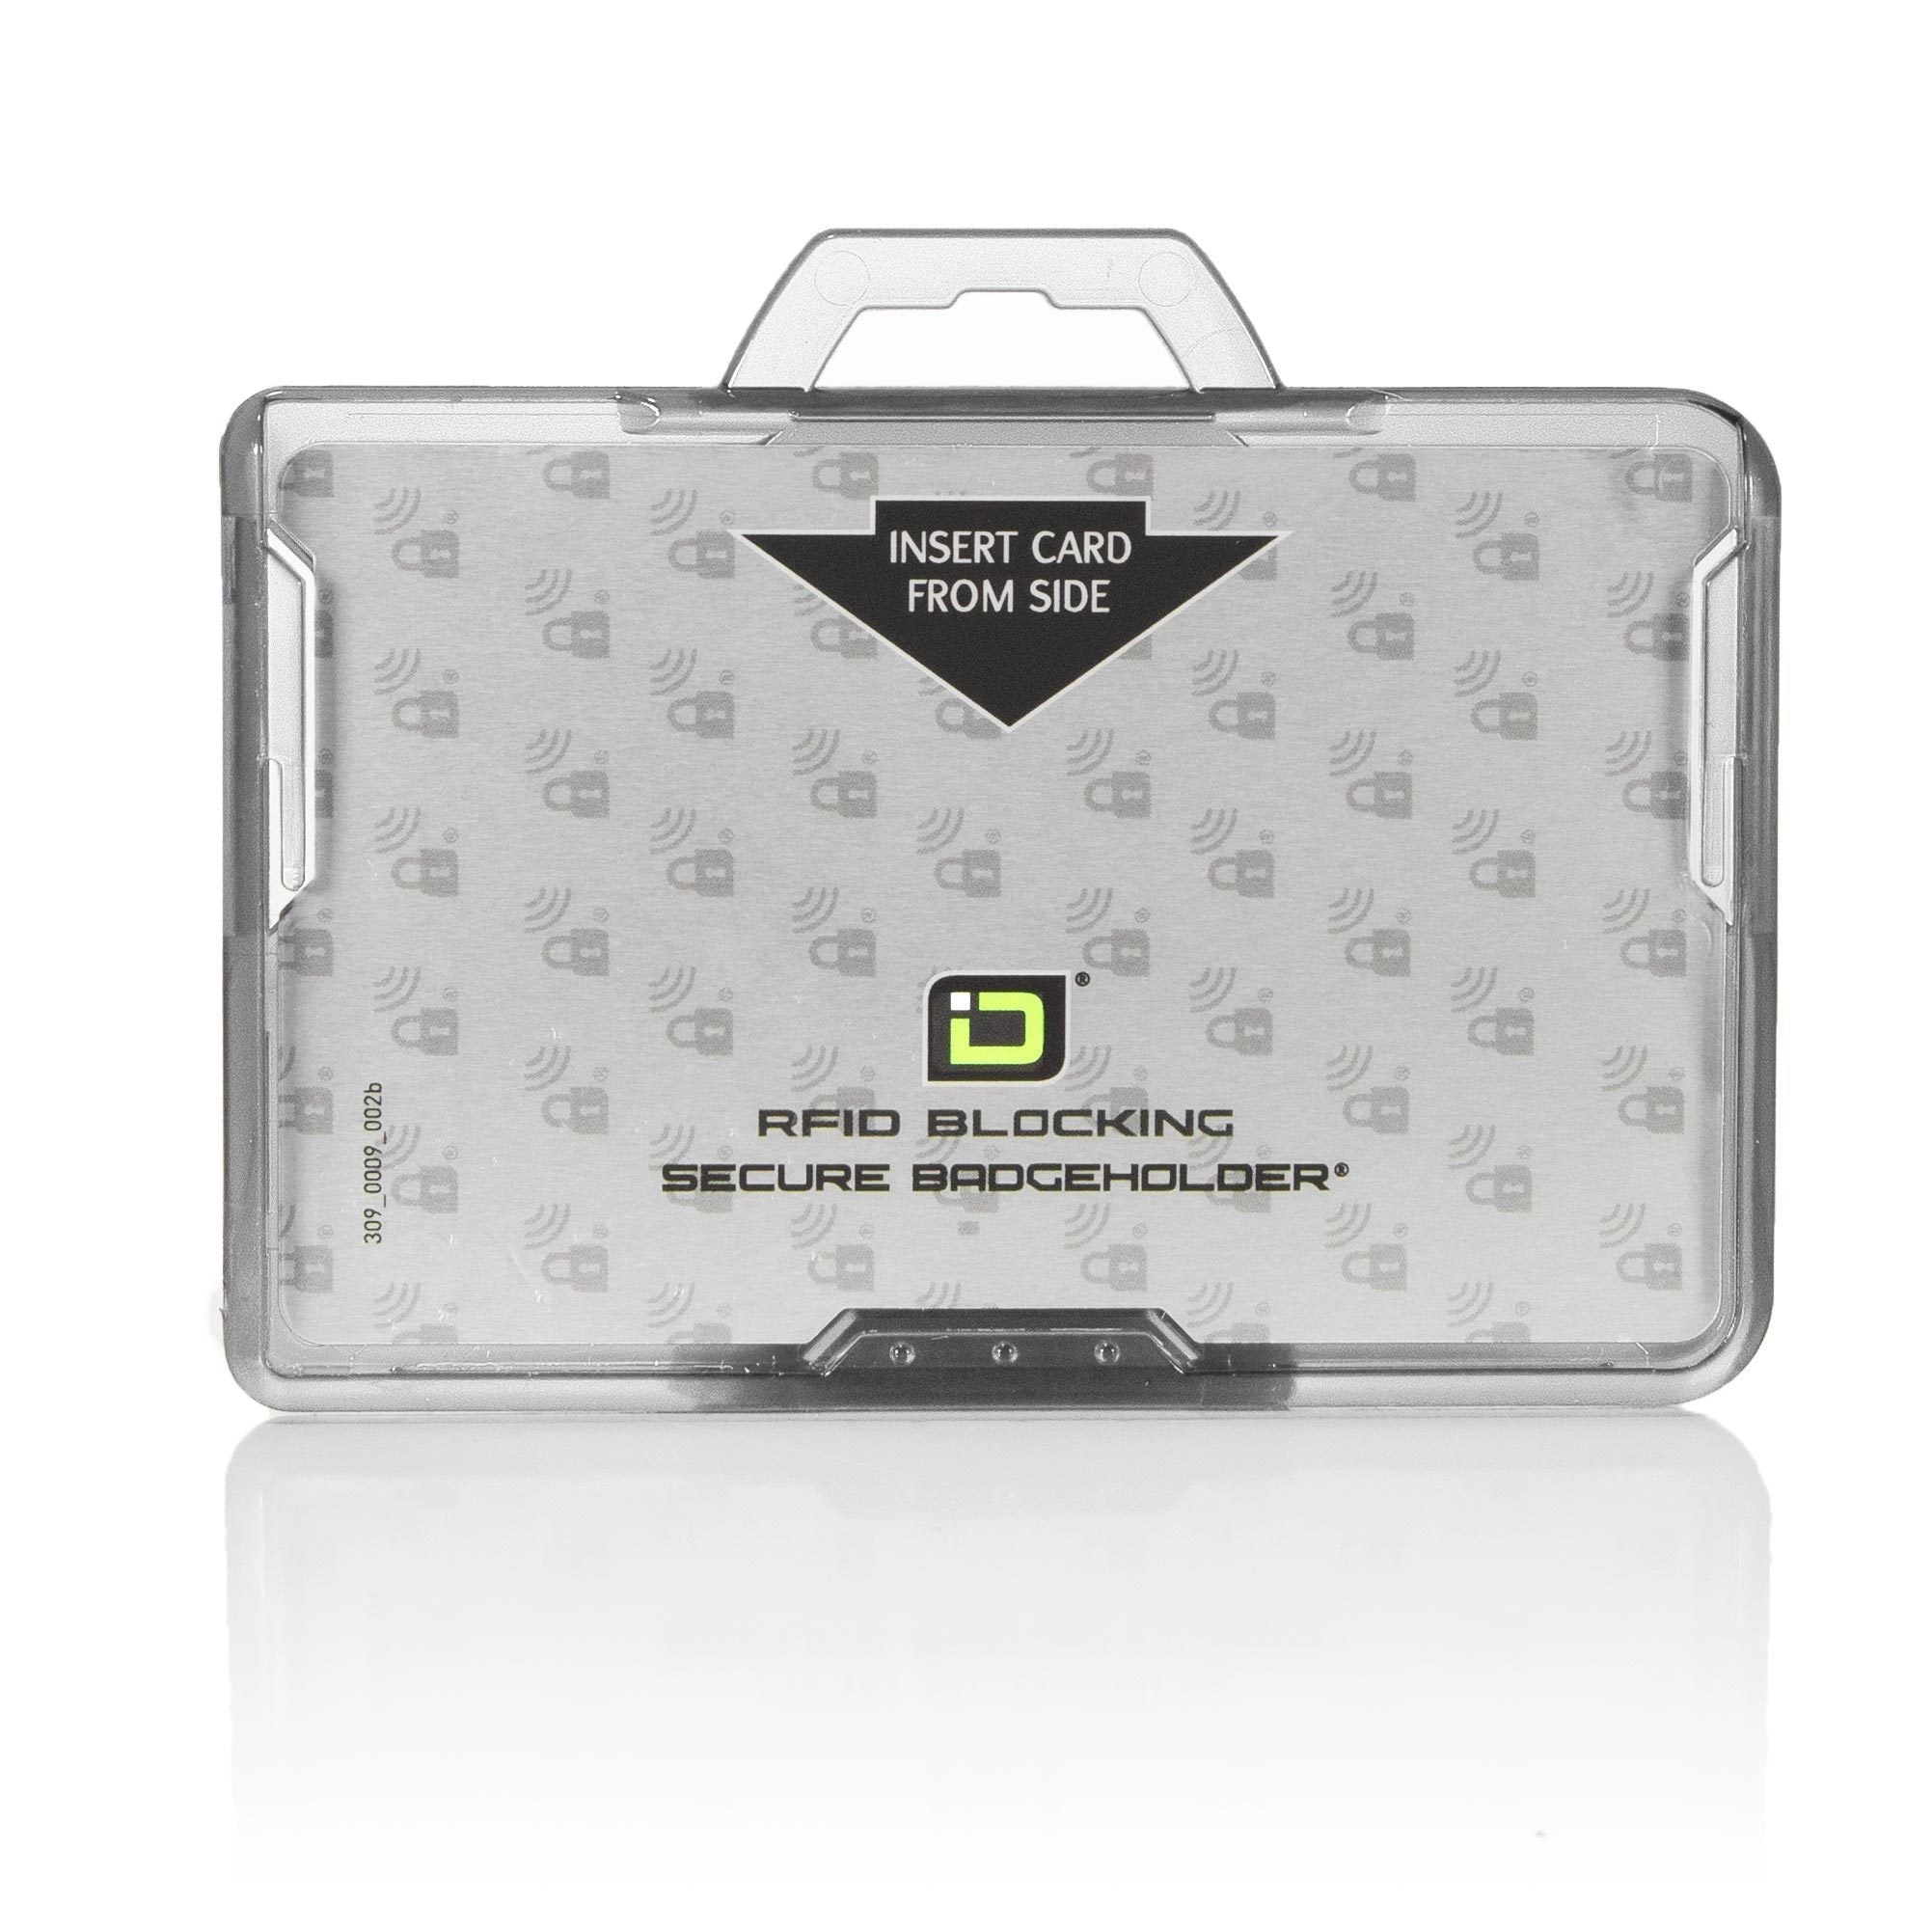 ID Stronghold Badgeholder BloxProx Clear Secure Badge Bolder BloxProx™ Lite LANDSCAPE - Protects 125Khz HID Prox